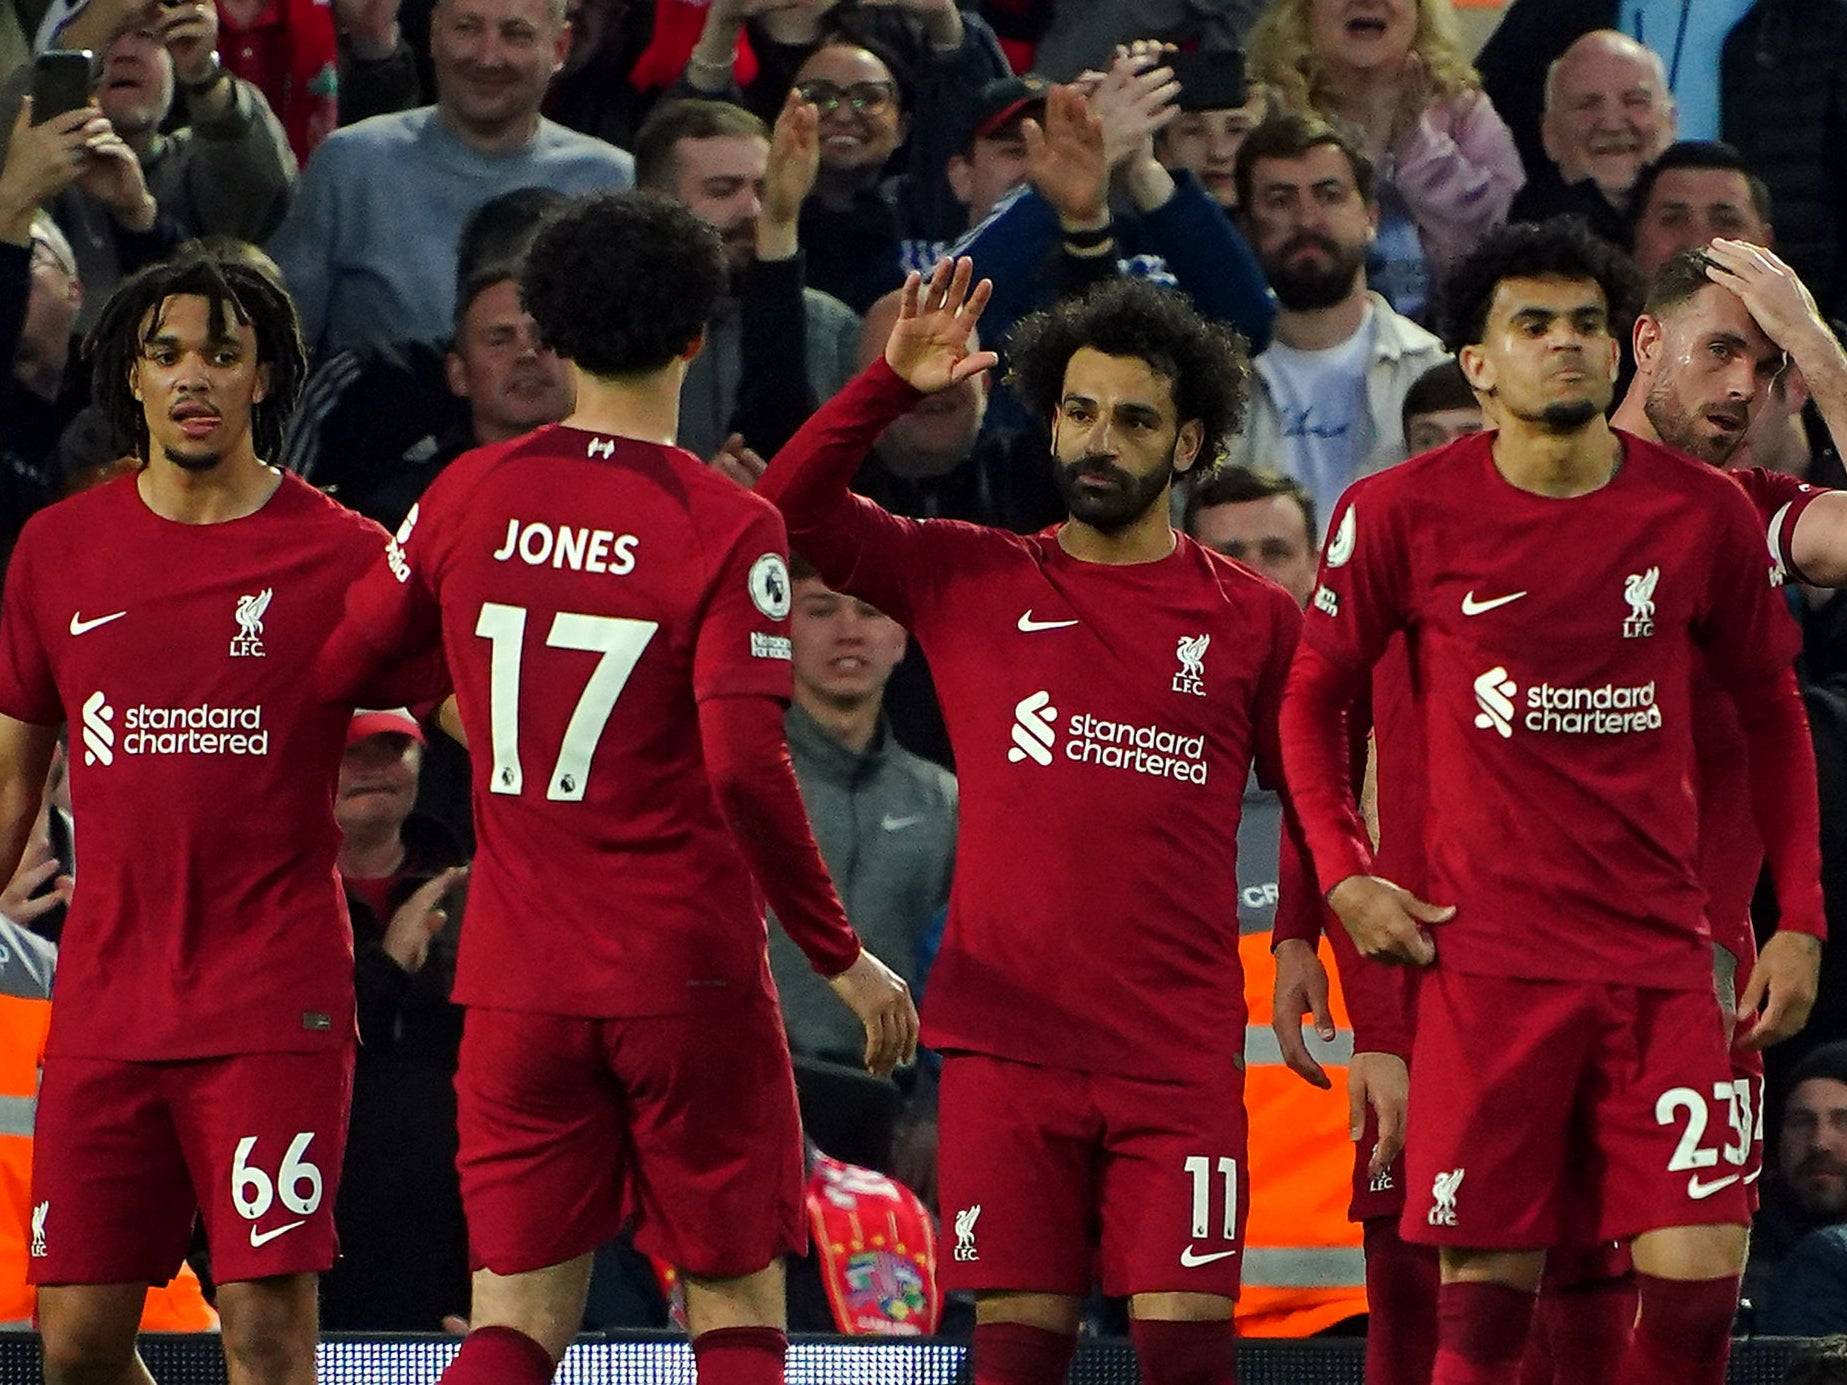 Mo Salah scored the only goal as Liverpool downed Fulham